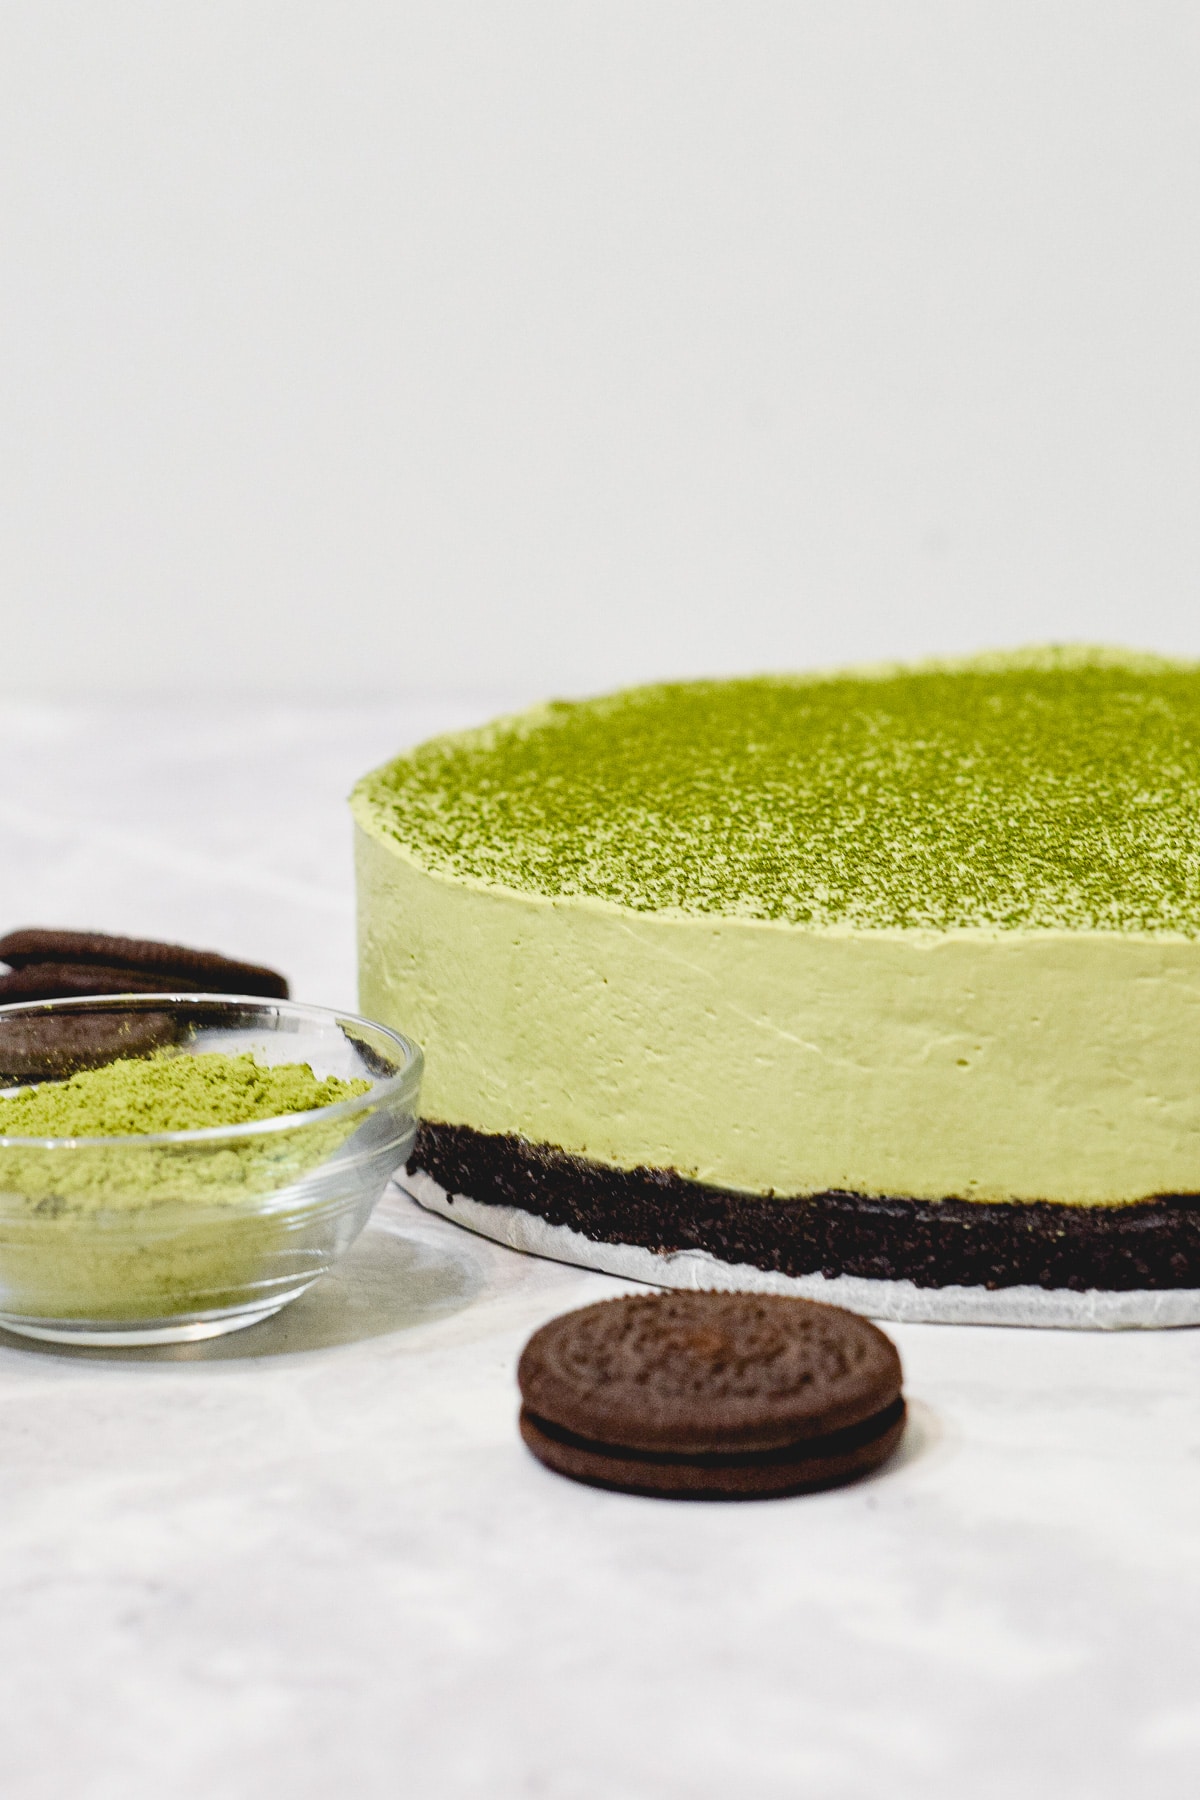 matcha green tea cheesecake side view with oreos and a bowl of matcha powder on the table